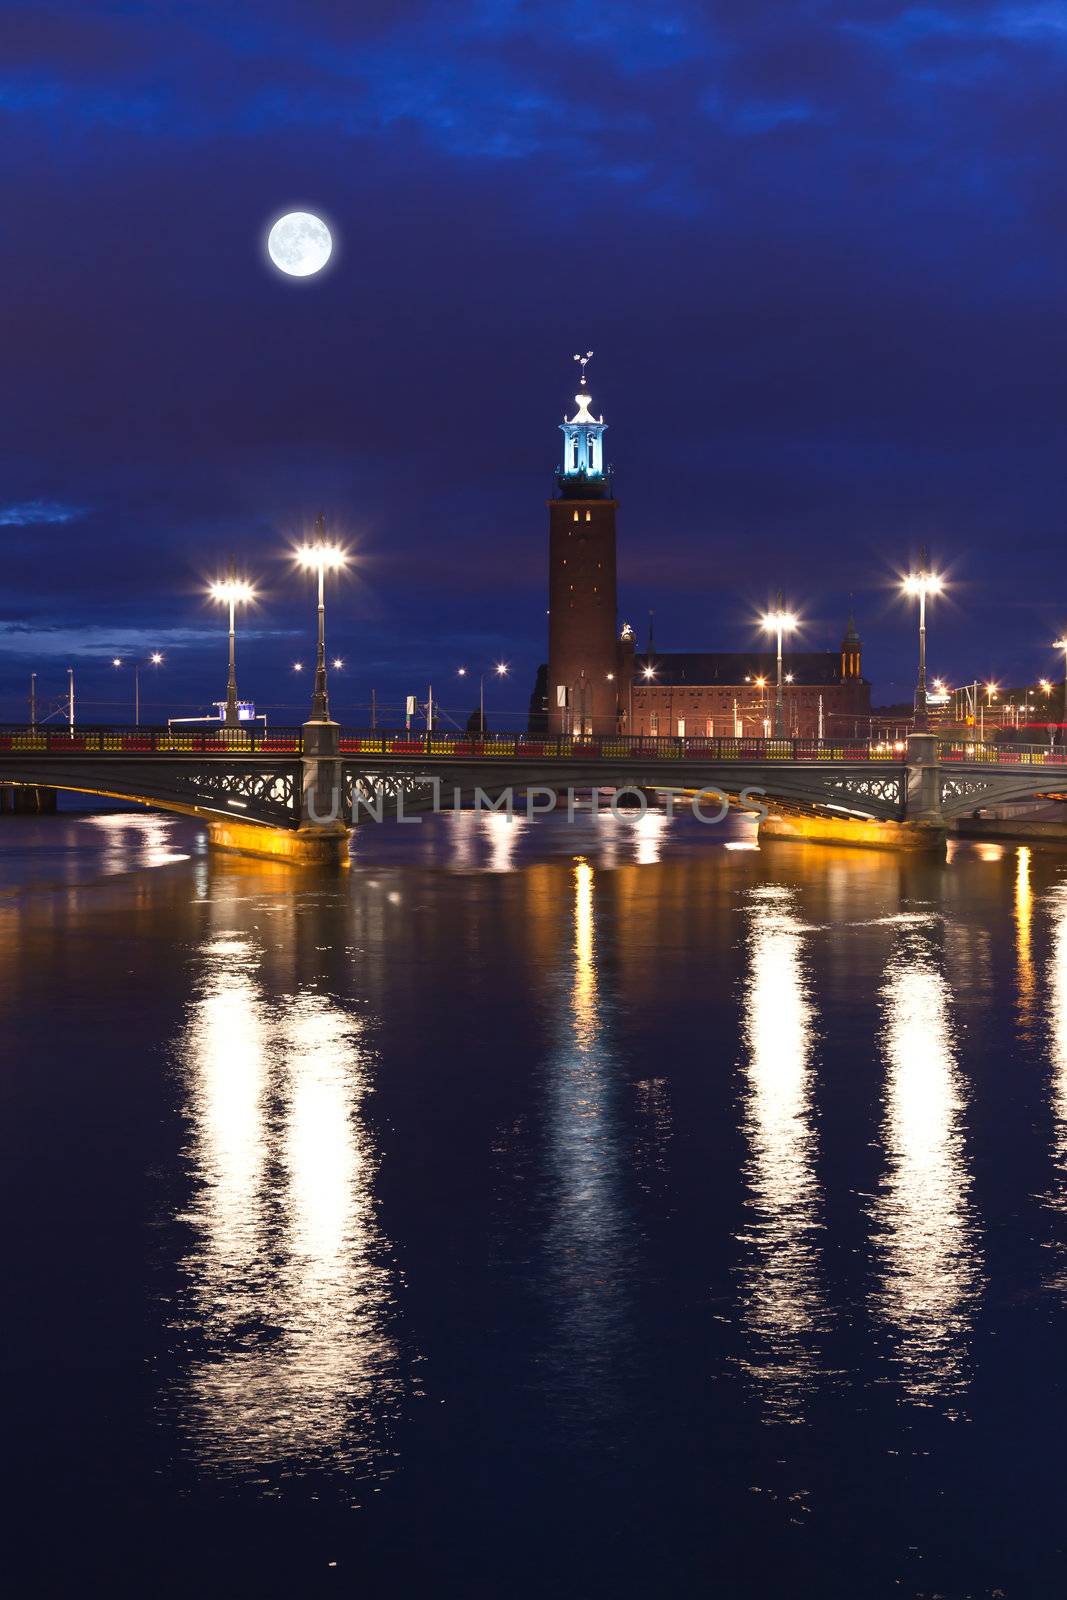 Stockholm City Hall at night by gary718